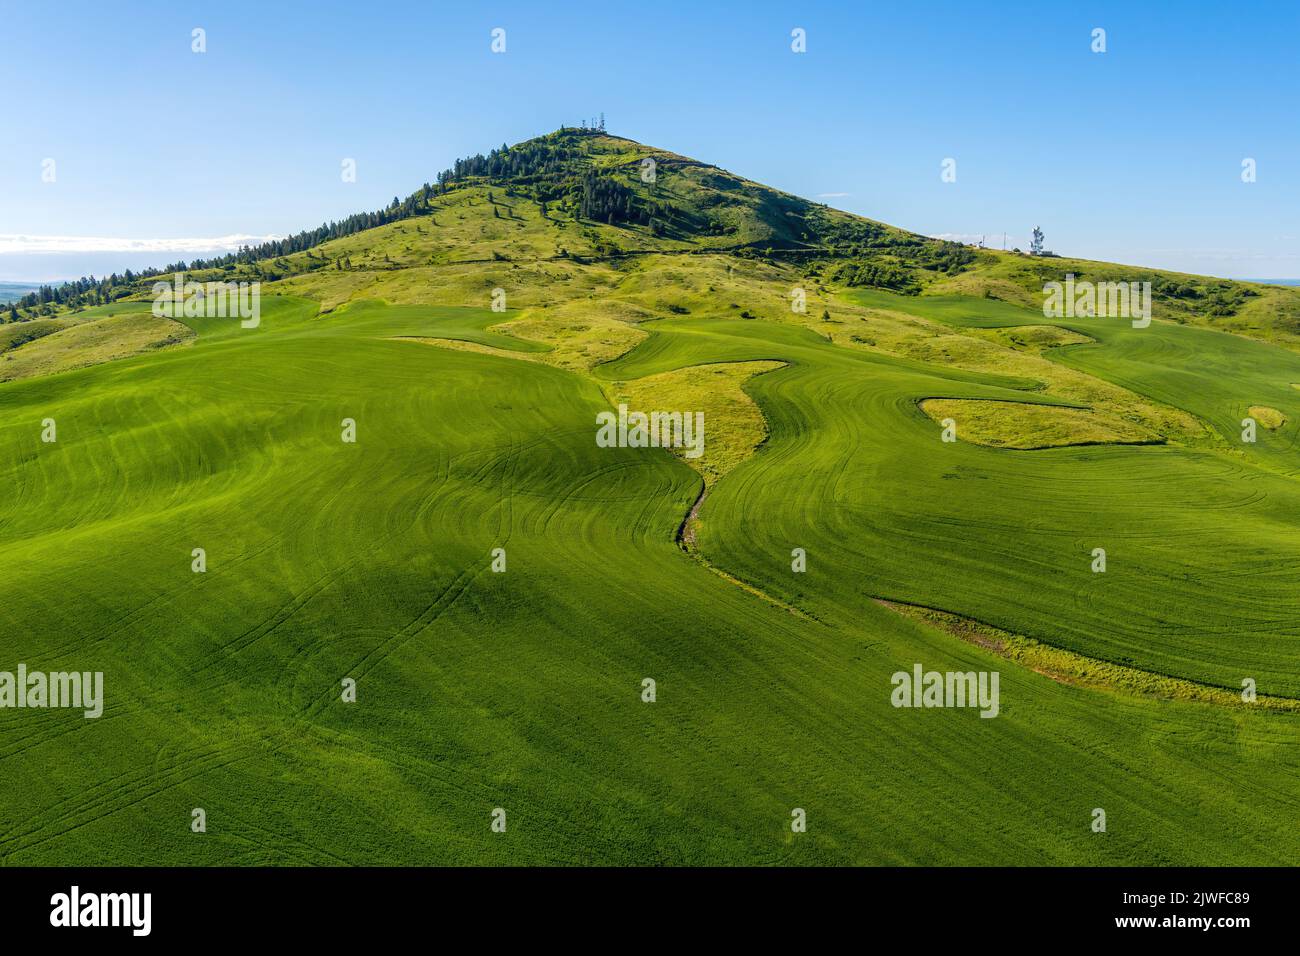 Farmland of wheat fields lead up to the base of Steptoe Butte Stock Photo